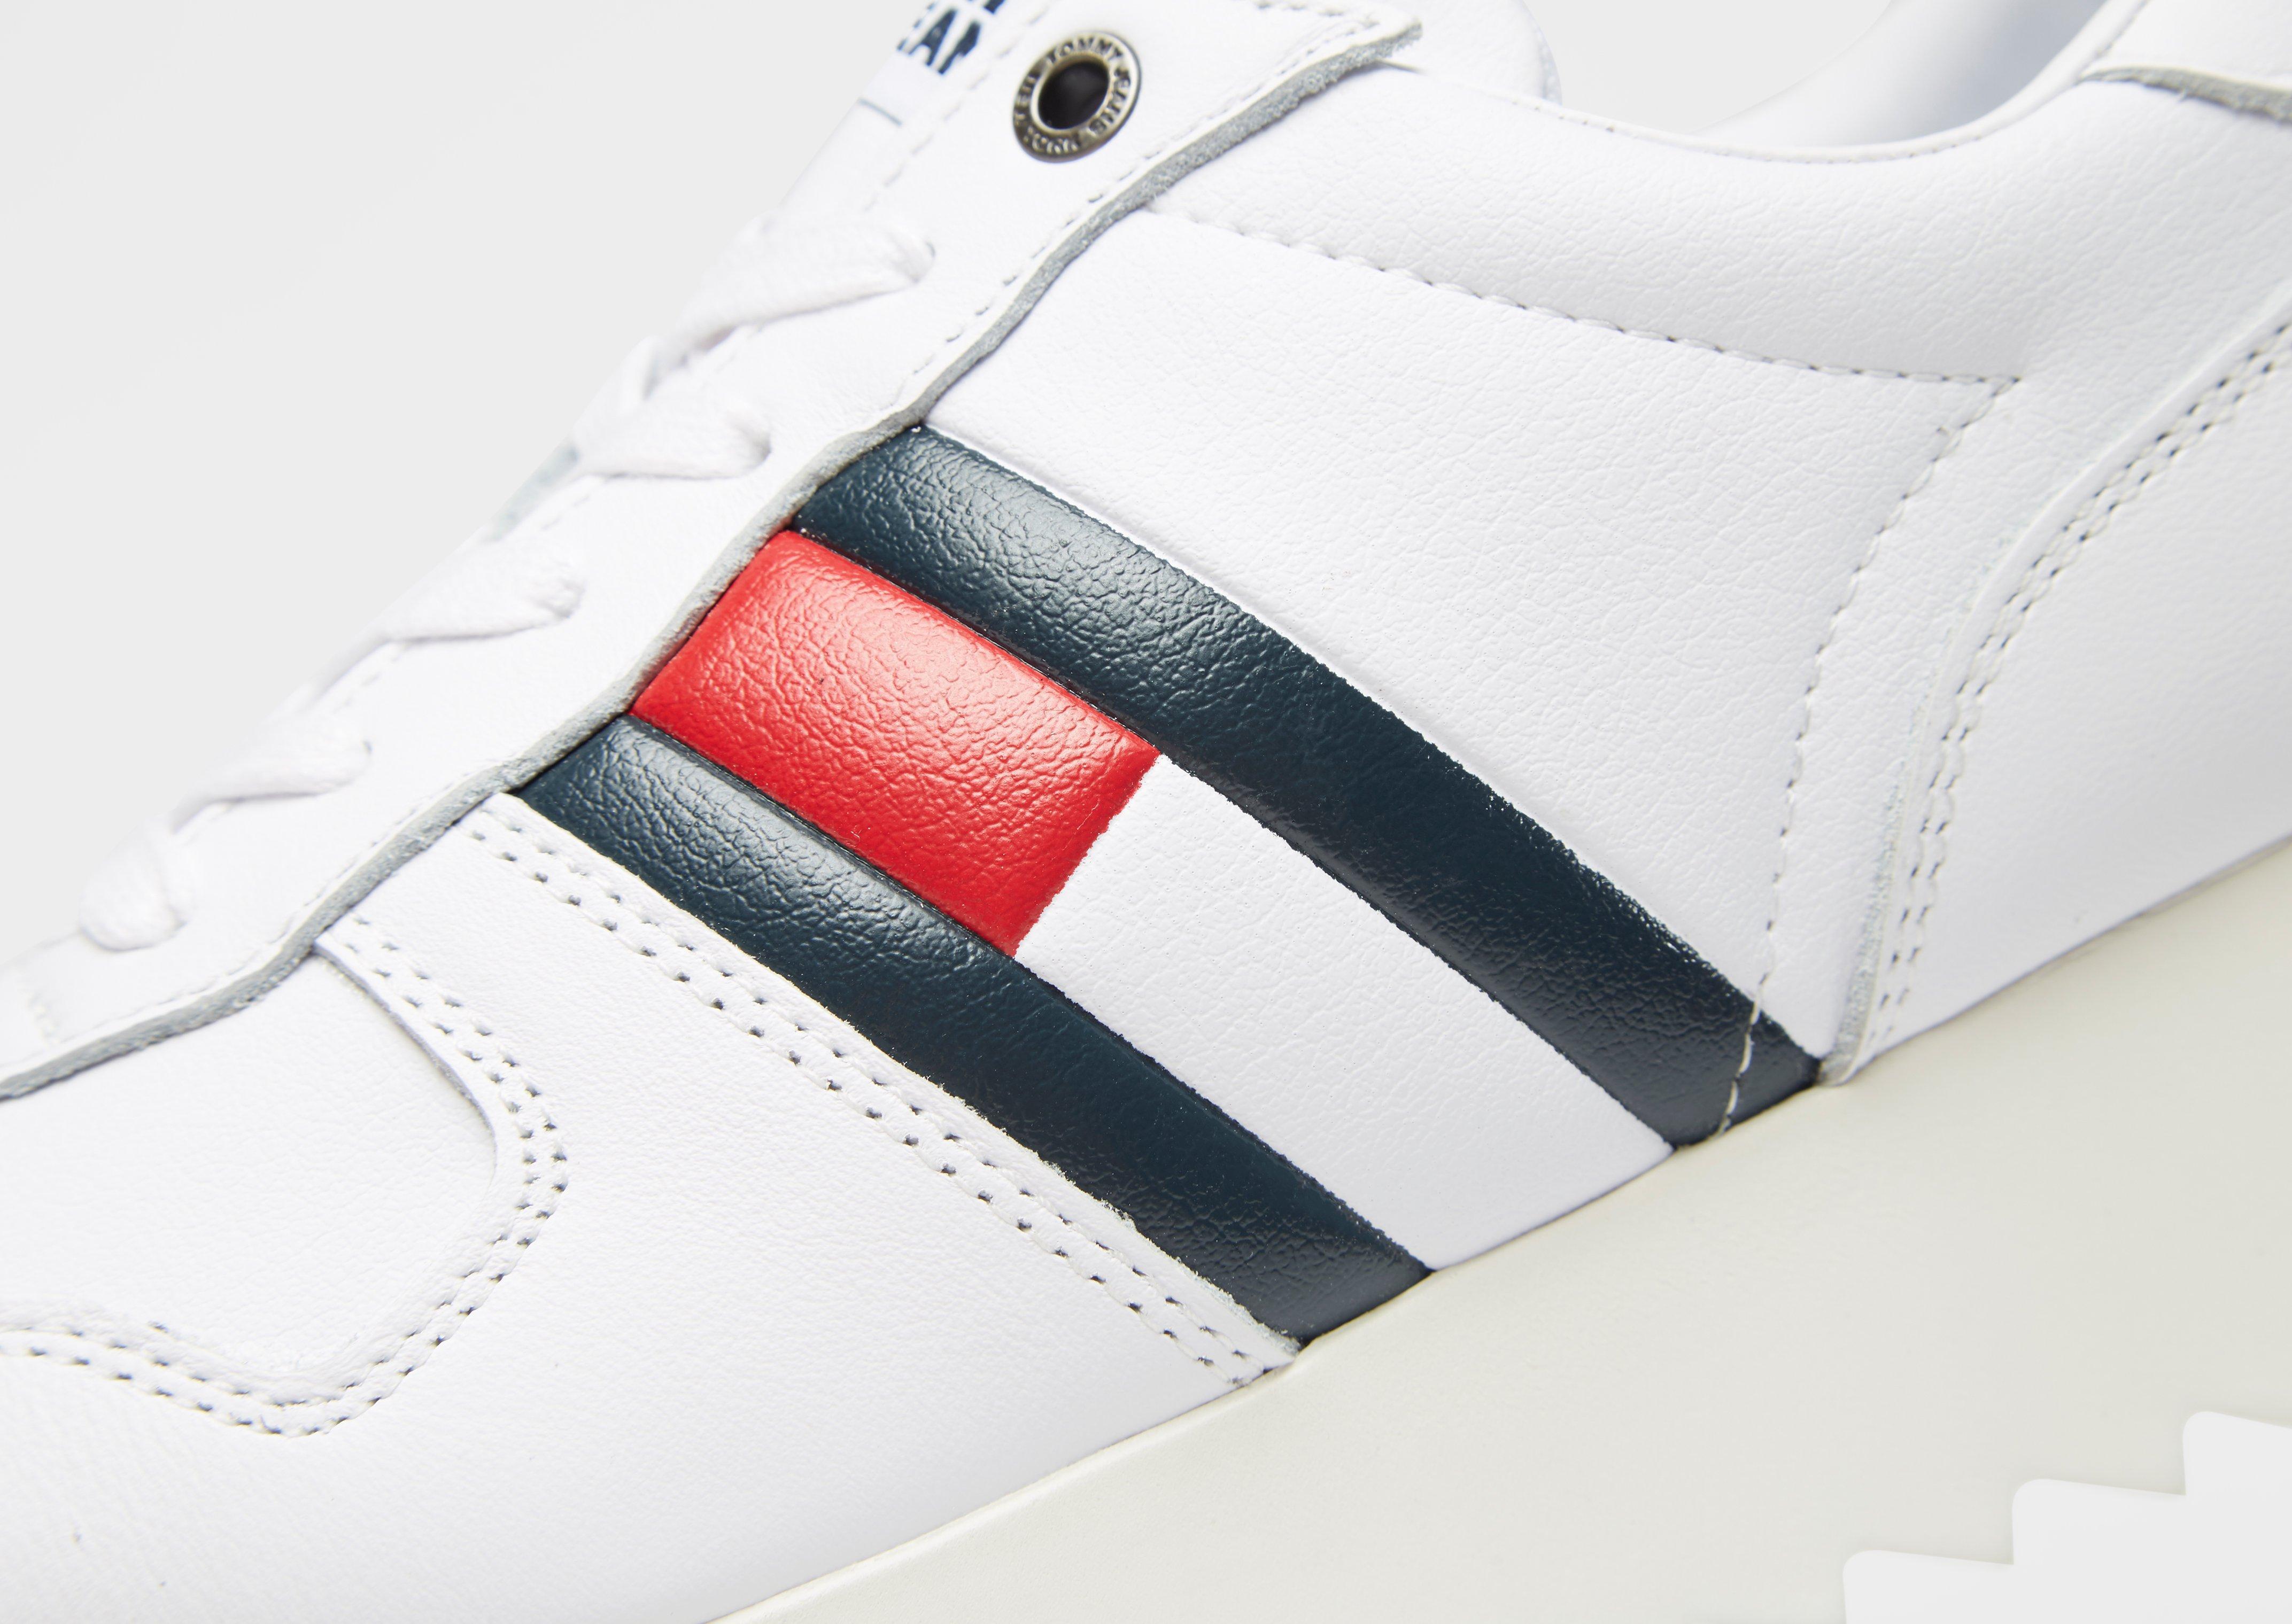 tommy hilfiger white high cleated sneaker trainers